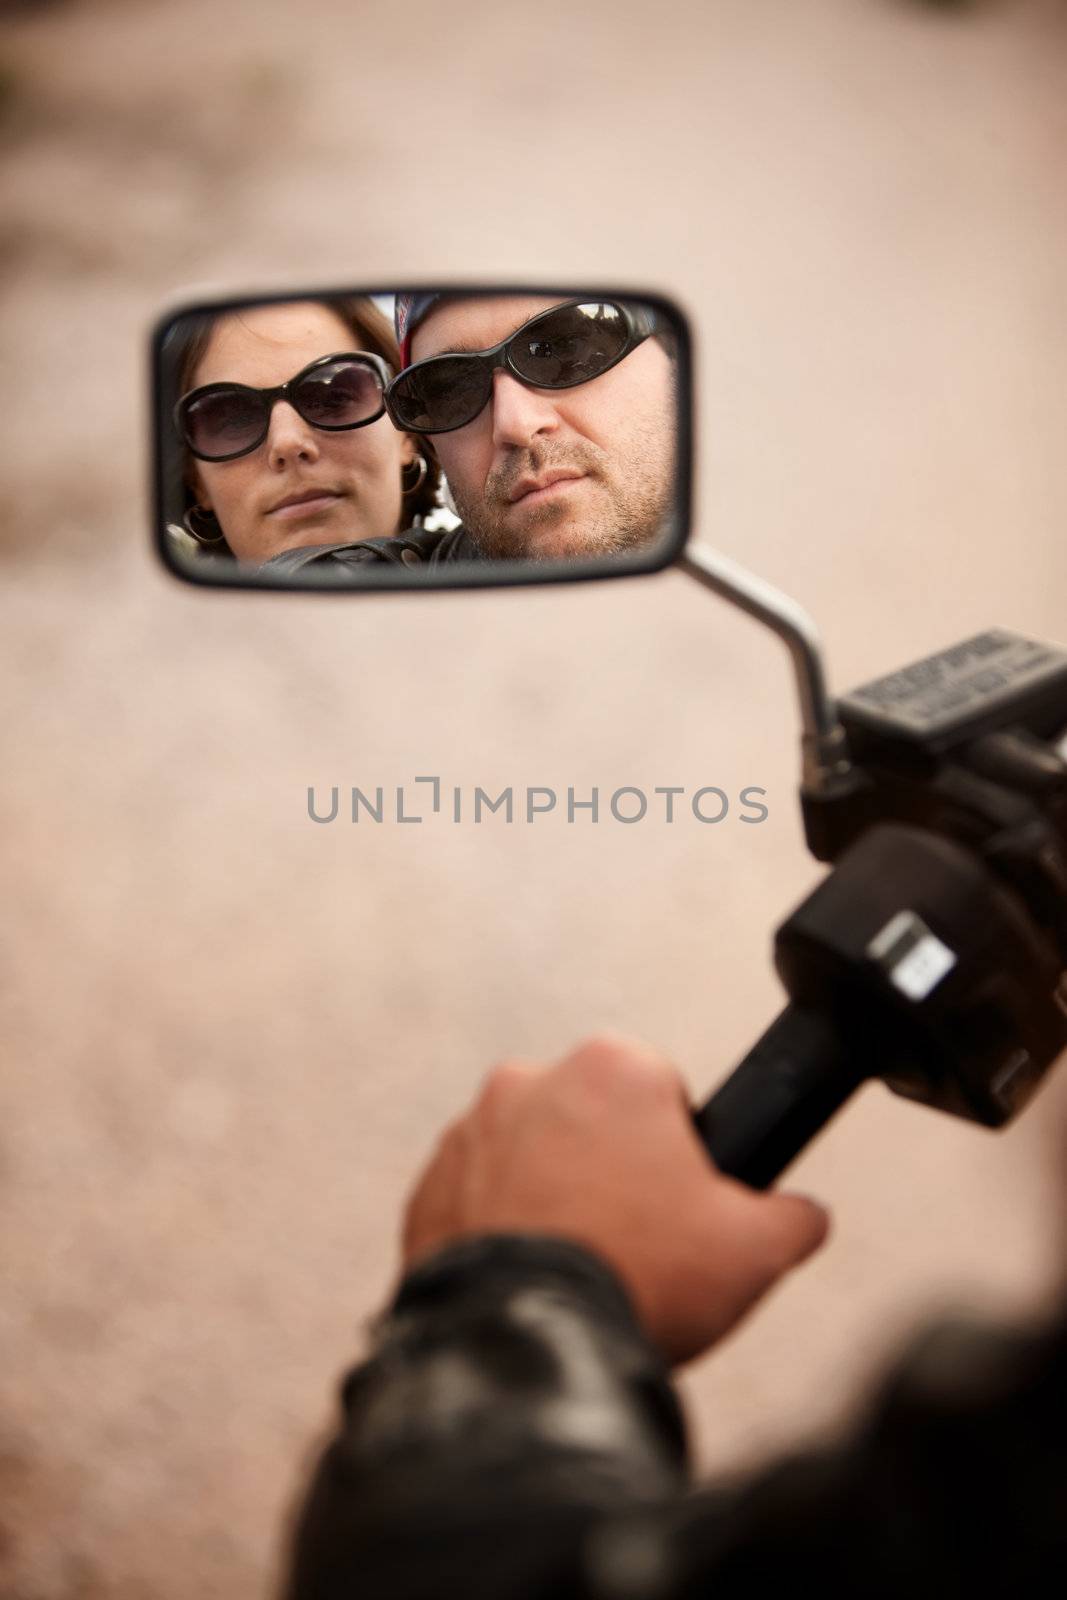 Reflection of Motorcycle Driver and Rider in Rearview Mirror